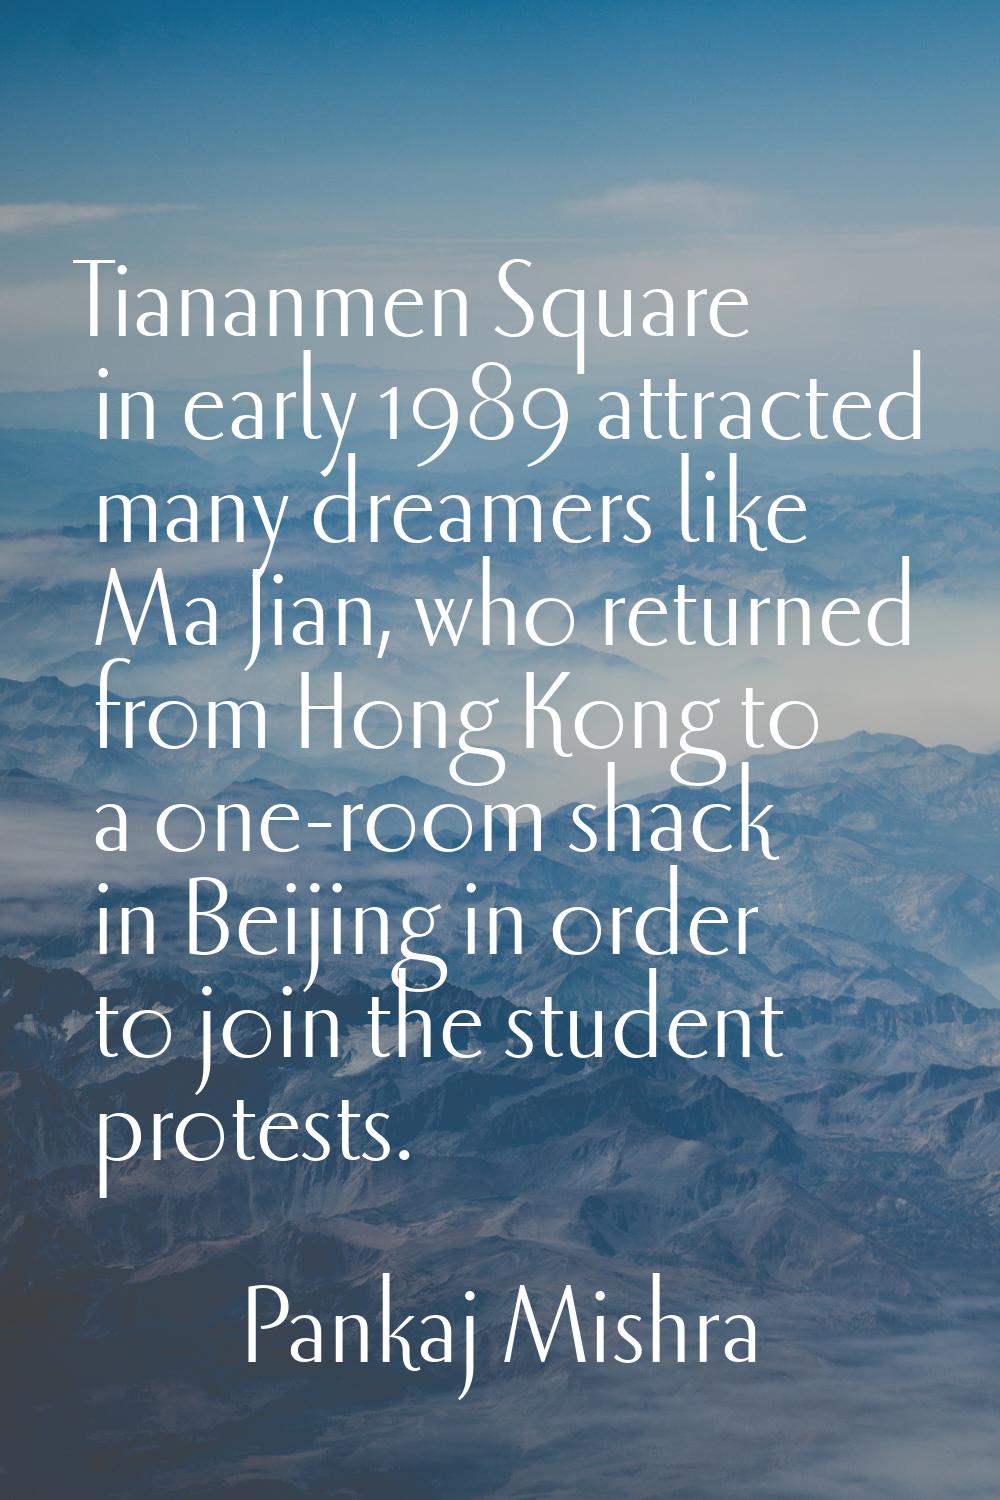 Tiananmen Square in early 1989 attracted many dreamers like Ma Jian, who returned from Hong Kong to